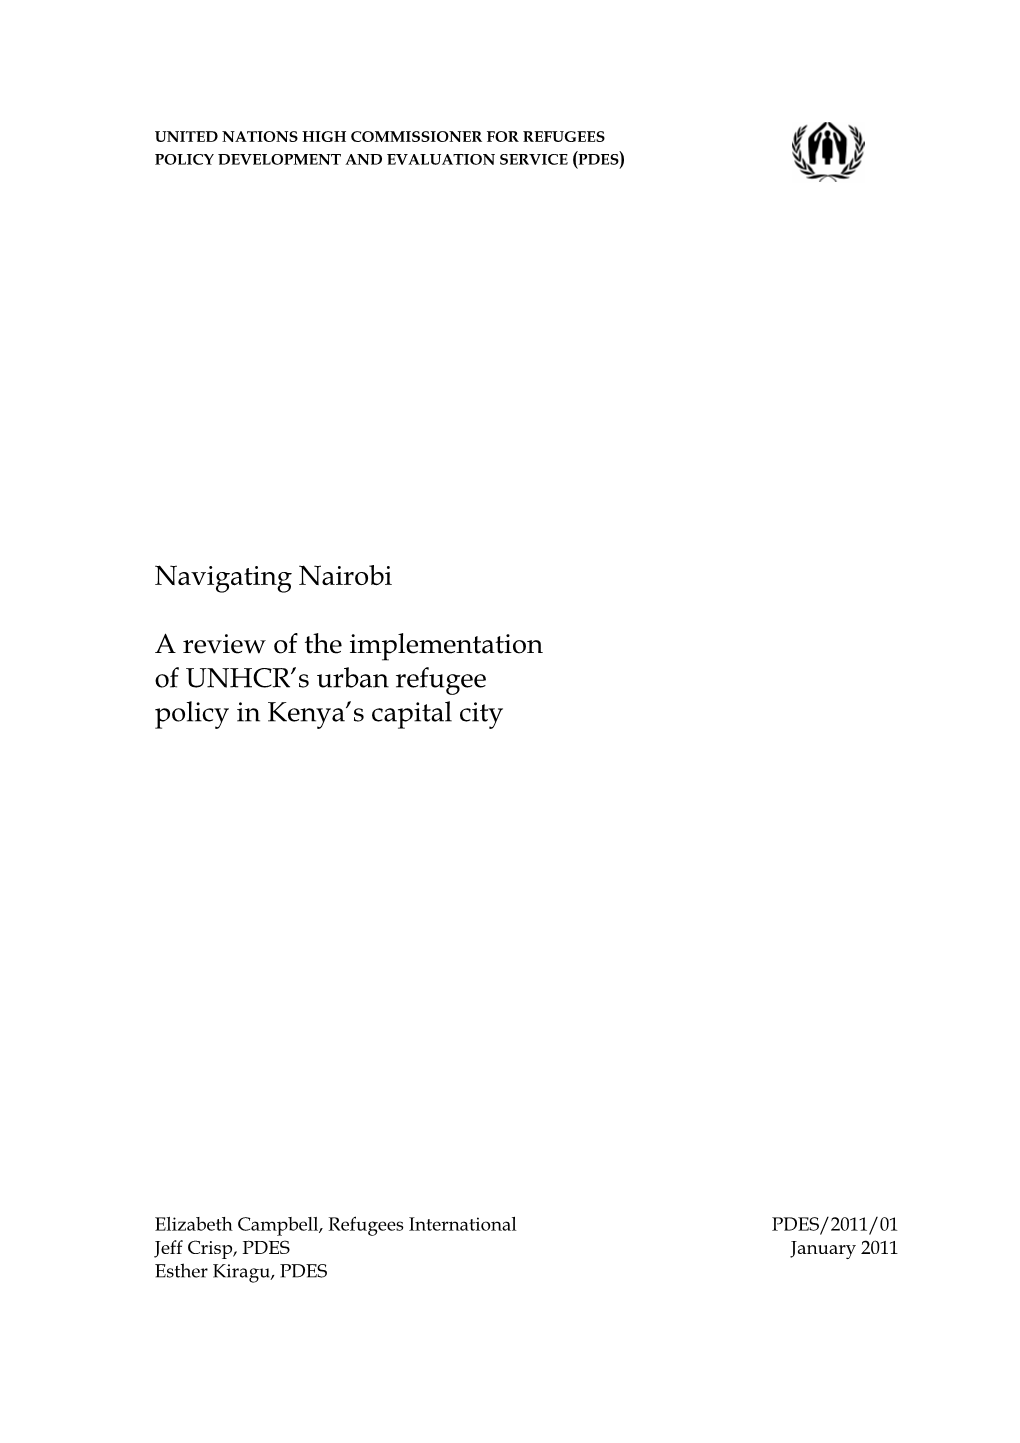 Navigating Nairobi a Review of the Implementation of UNHCR's Urban